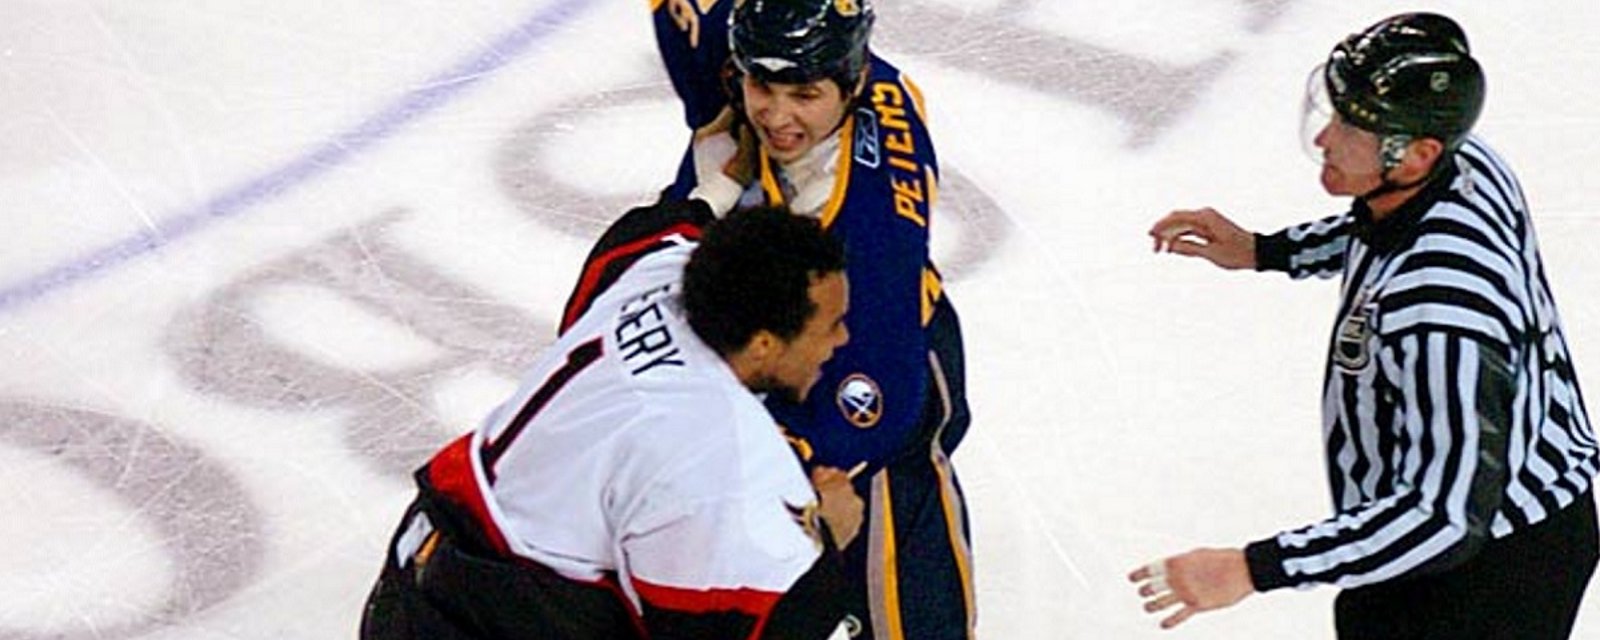 10 years ago today Ray Emery fights a goalie and an enforcer in an epic hockey brawl!